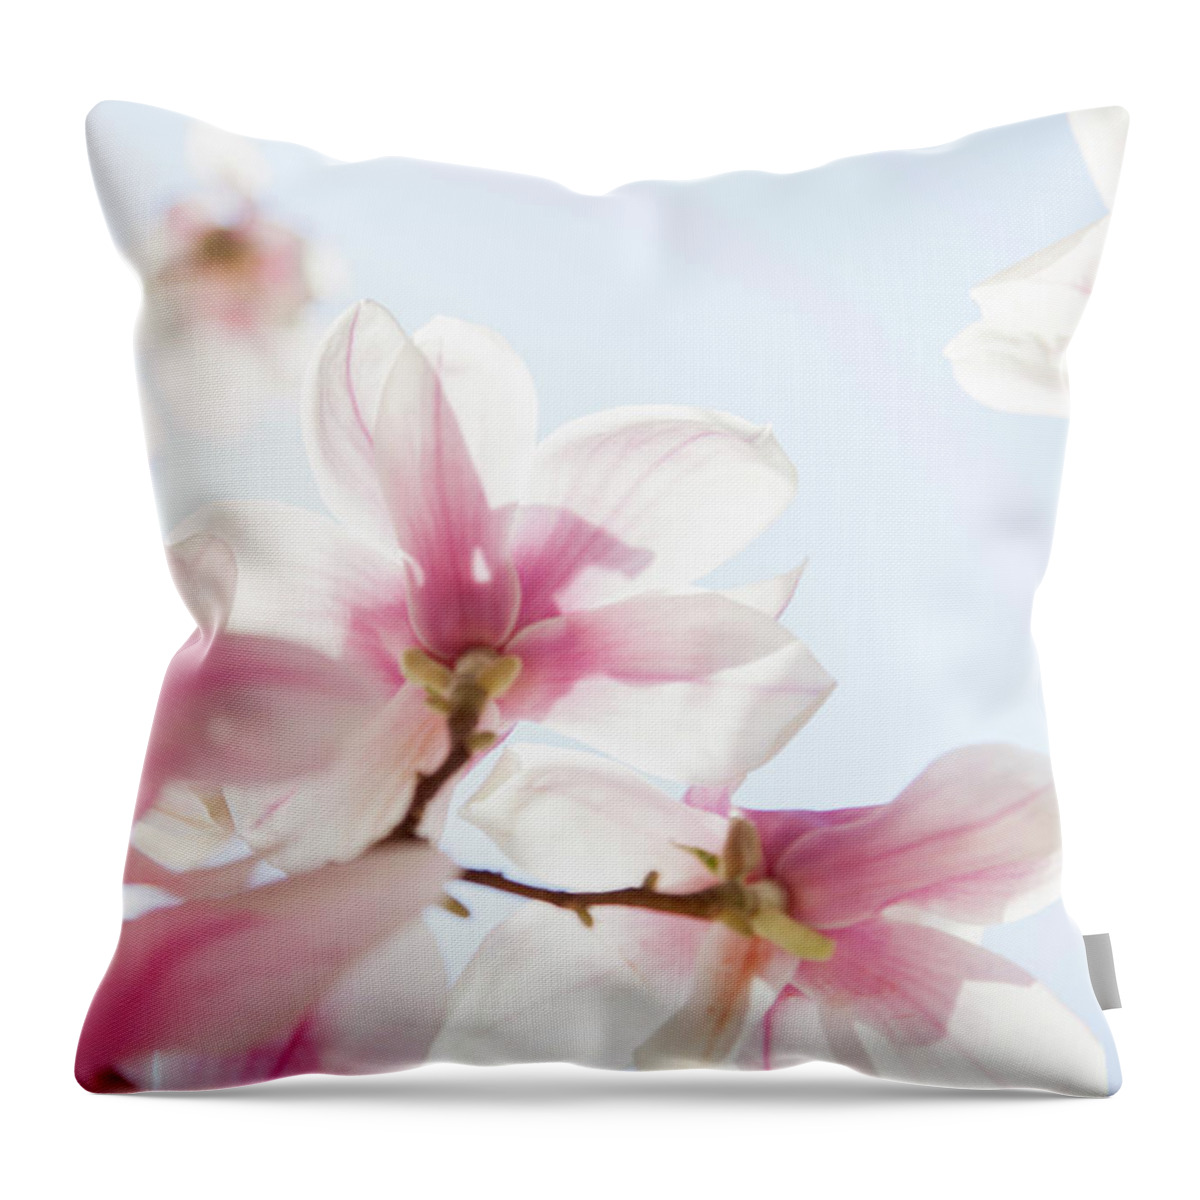 Clear Sky Throw Pillow featuring the photograph Close Up Of Pink Flowers by Stefanie Grewel